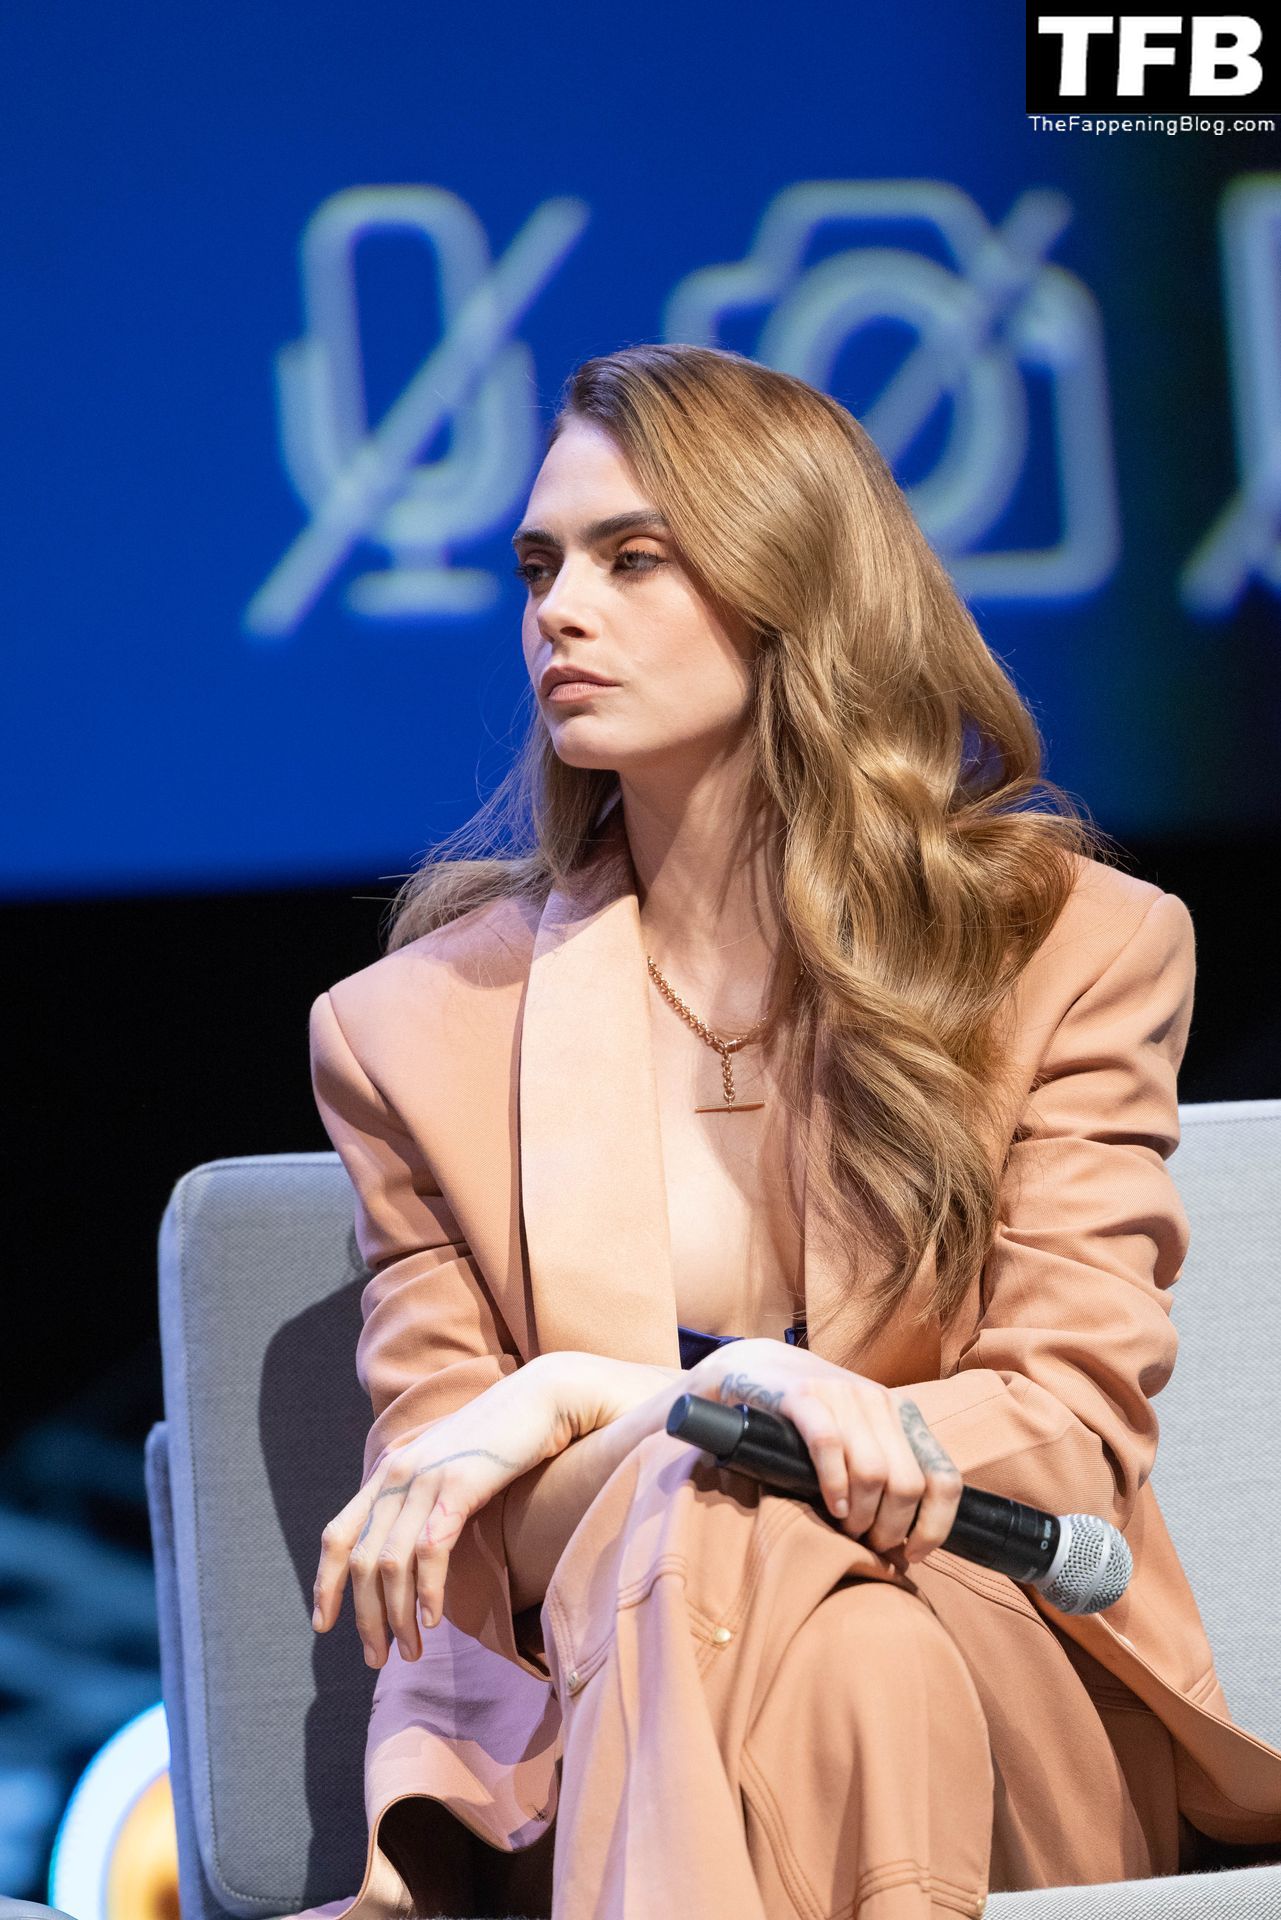 Cara-Delevingne-Sexy-The-Fappening-Blog-100.jpg